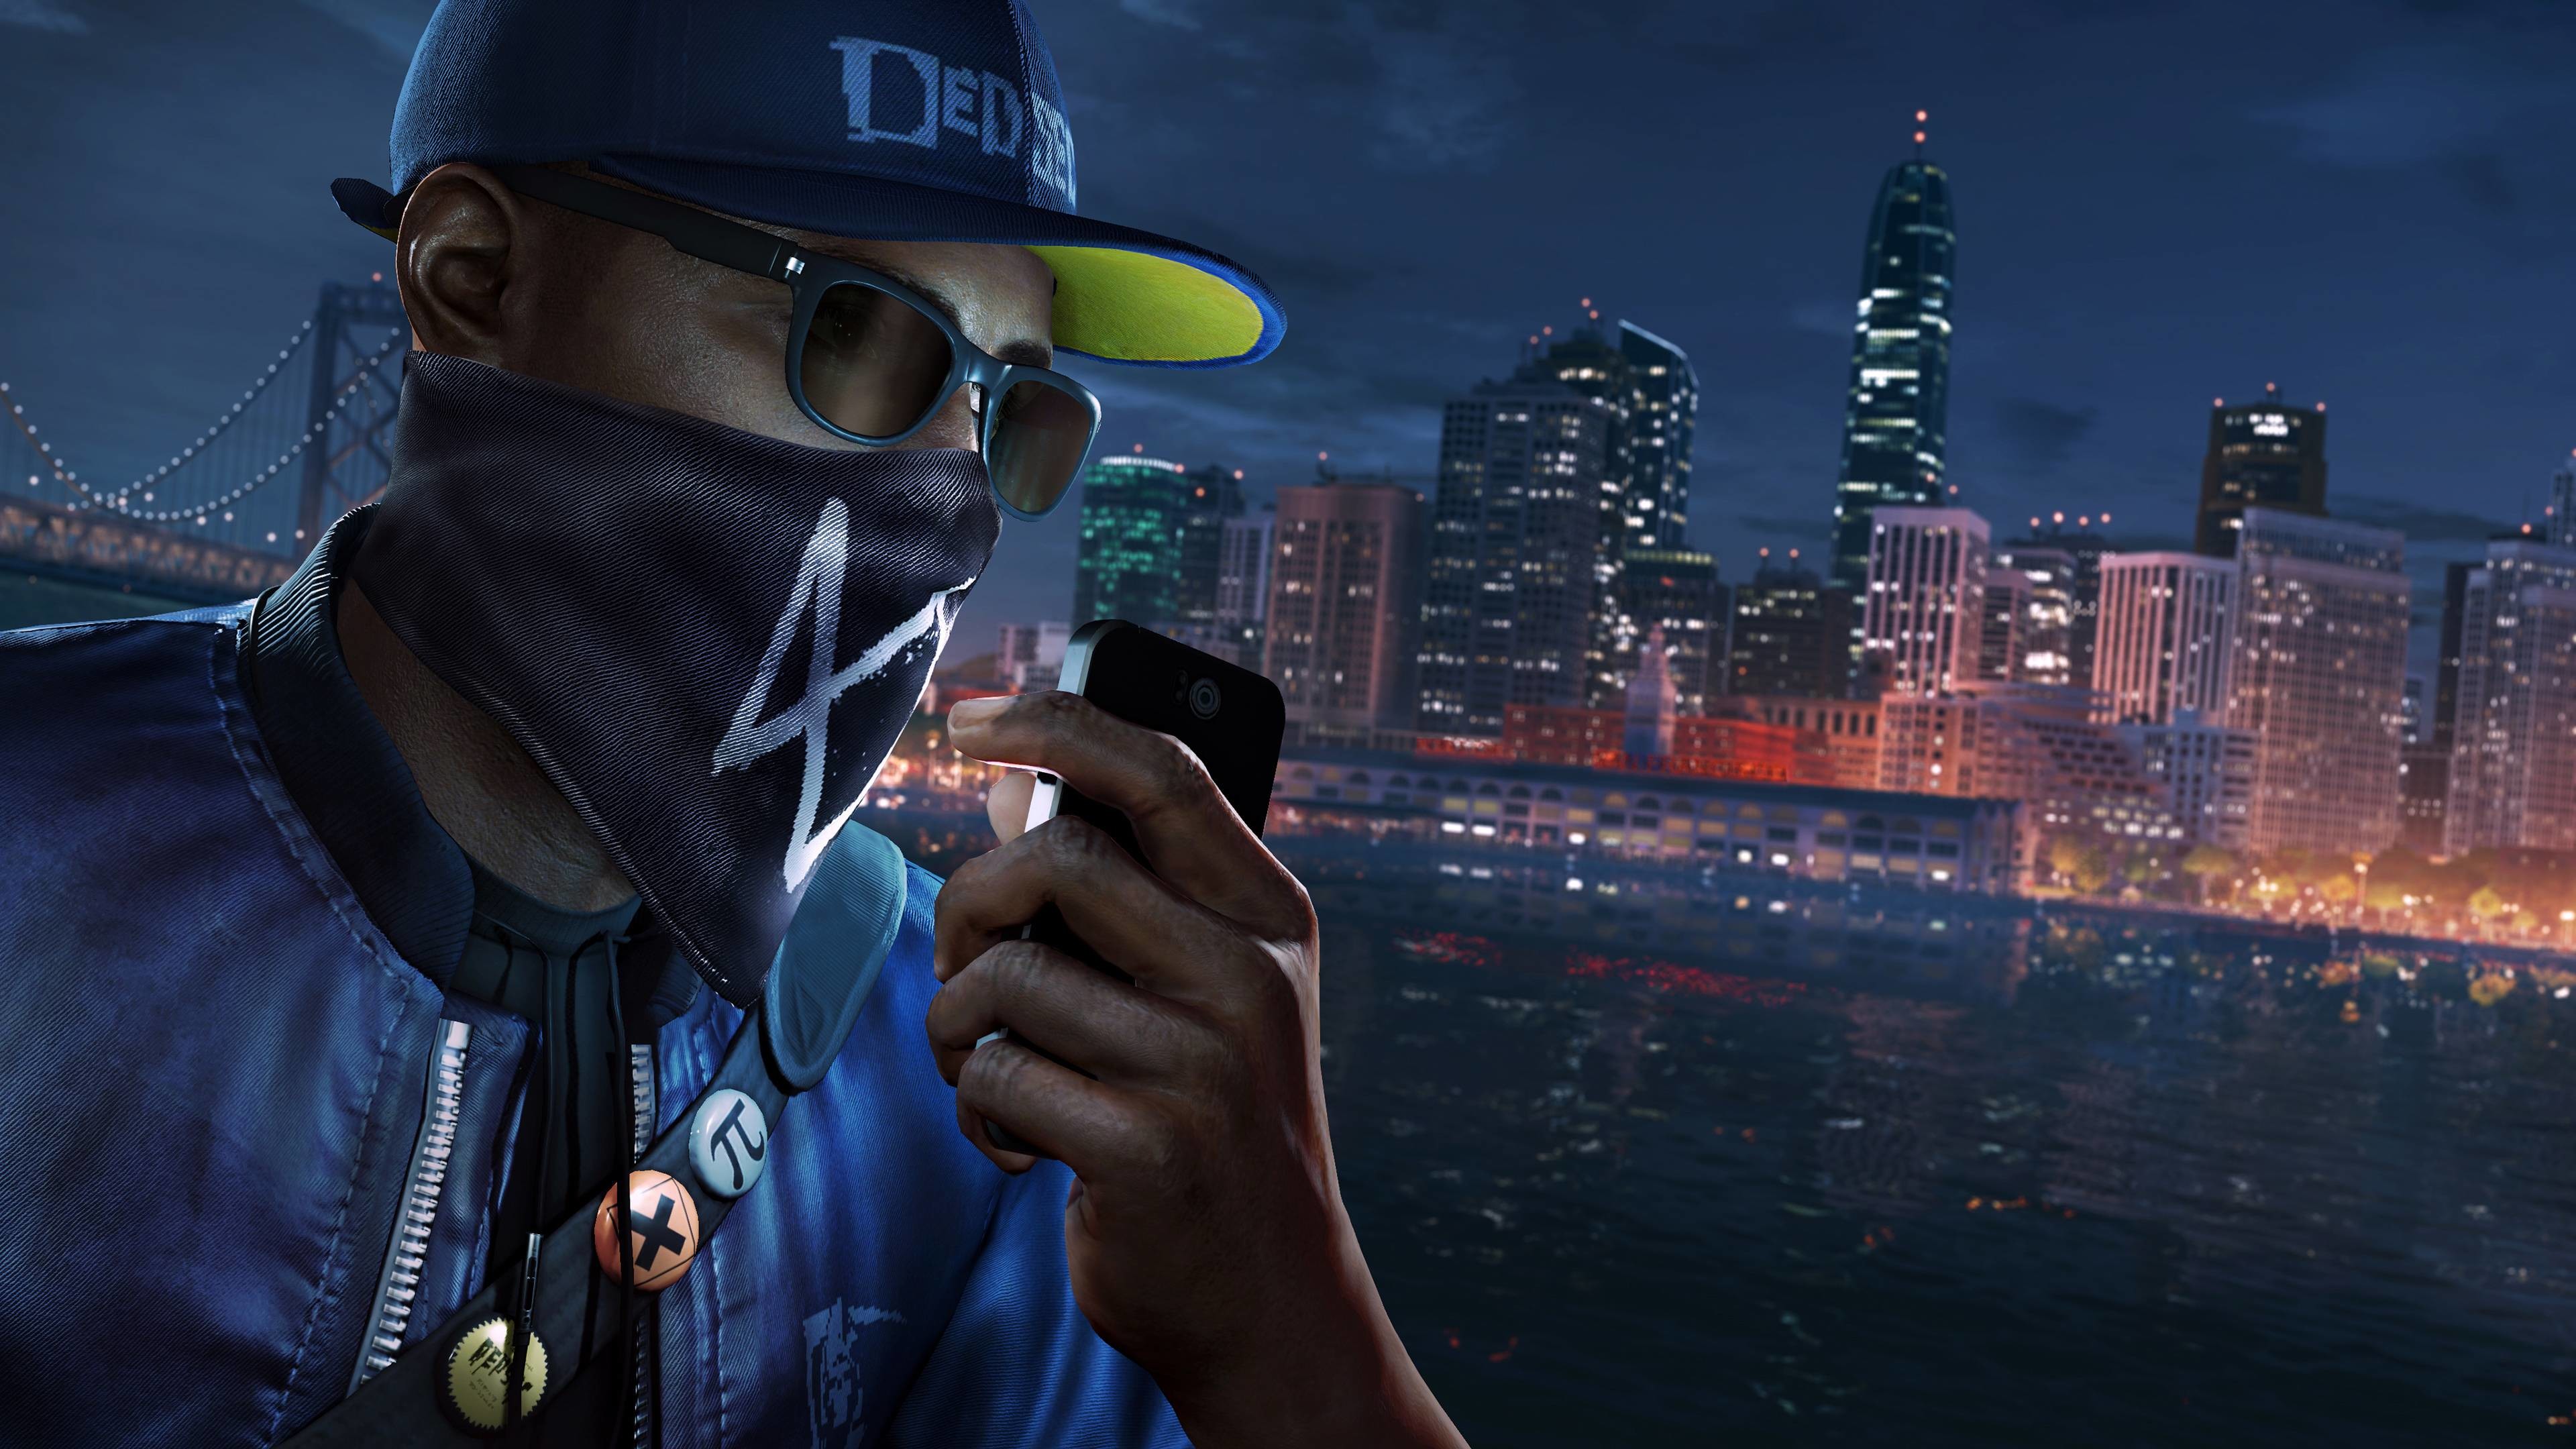 Watch Dogs 2, Marcus Holloway, PS4 Pro, 4K